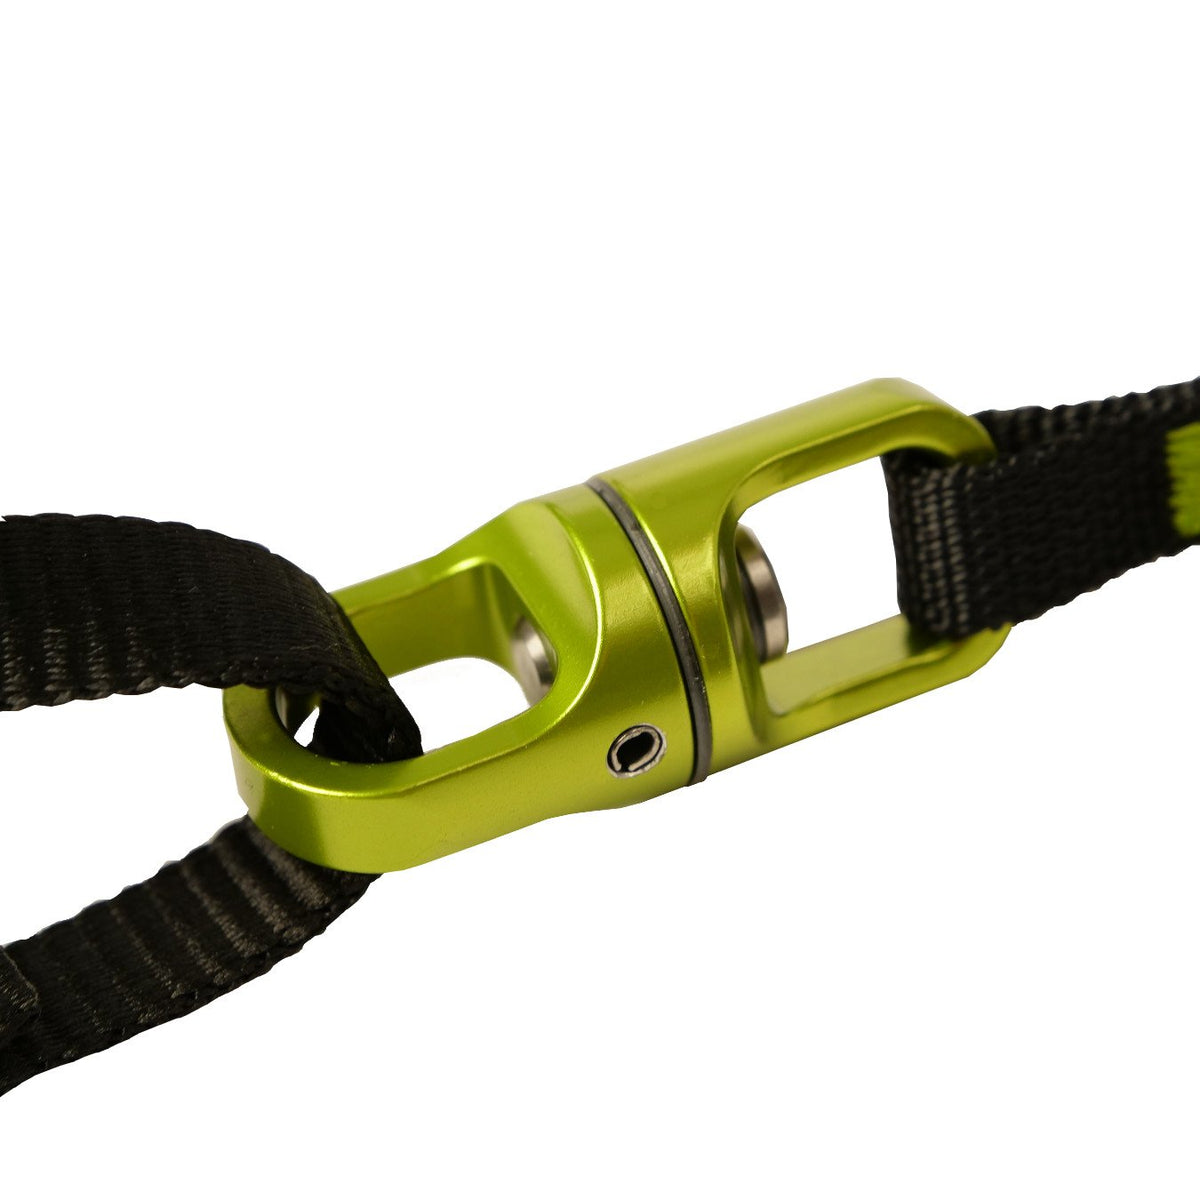 Close up view of the Black Diamond Spinner Leash swivelling mechanism in Green